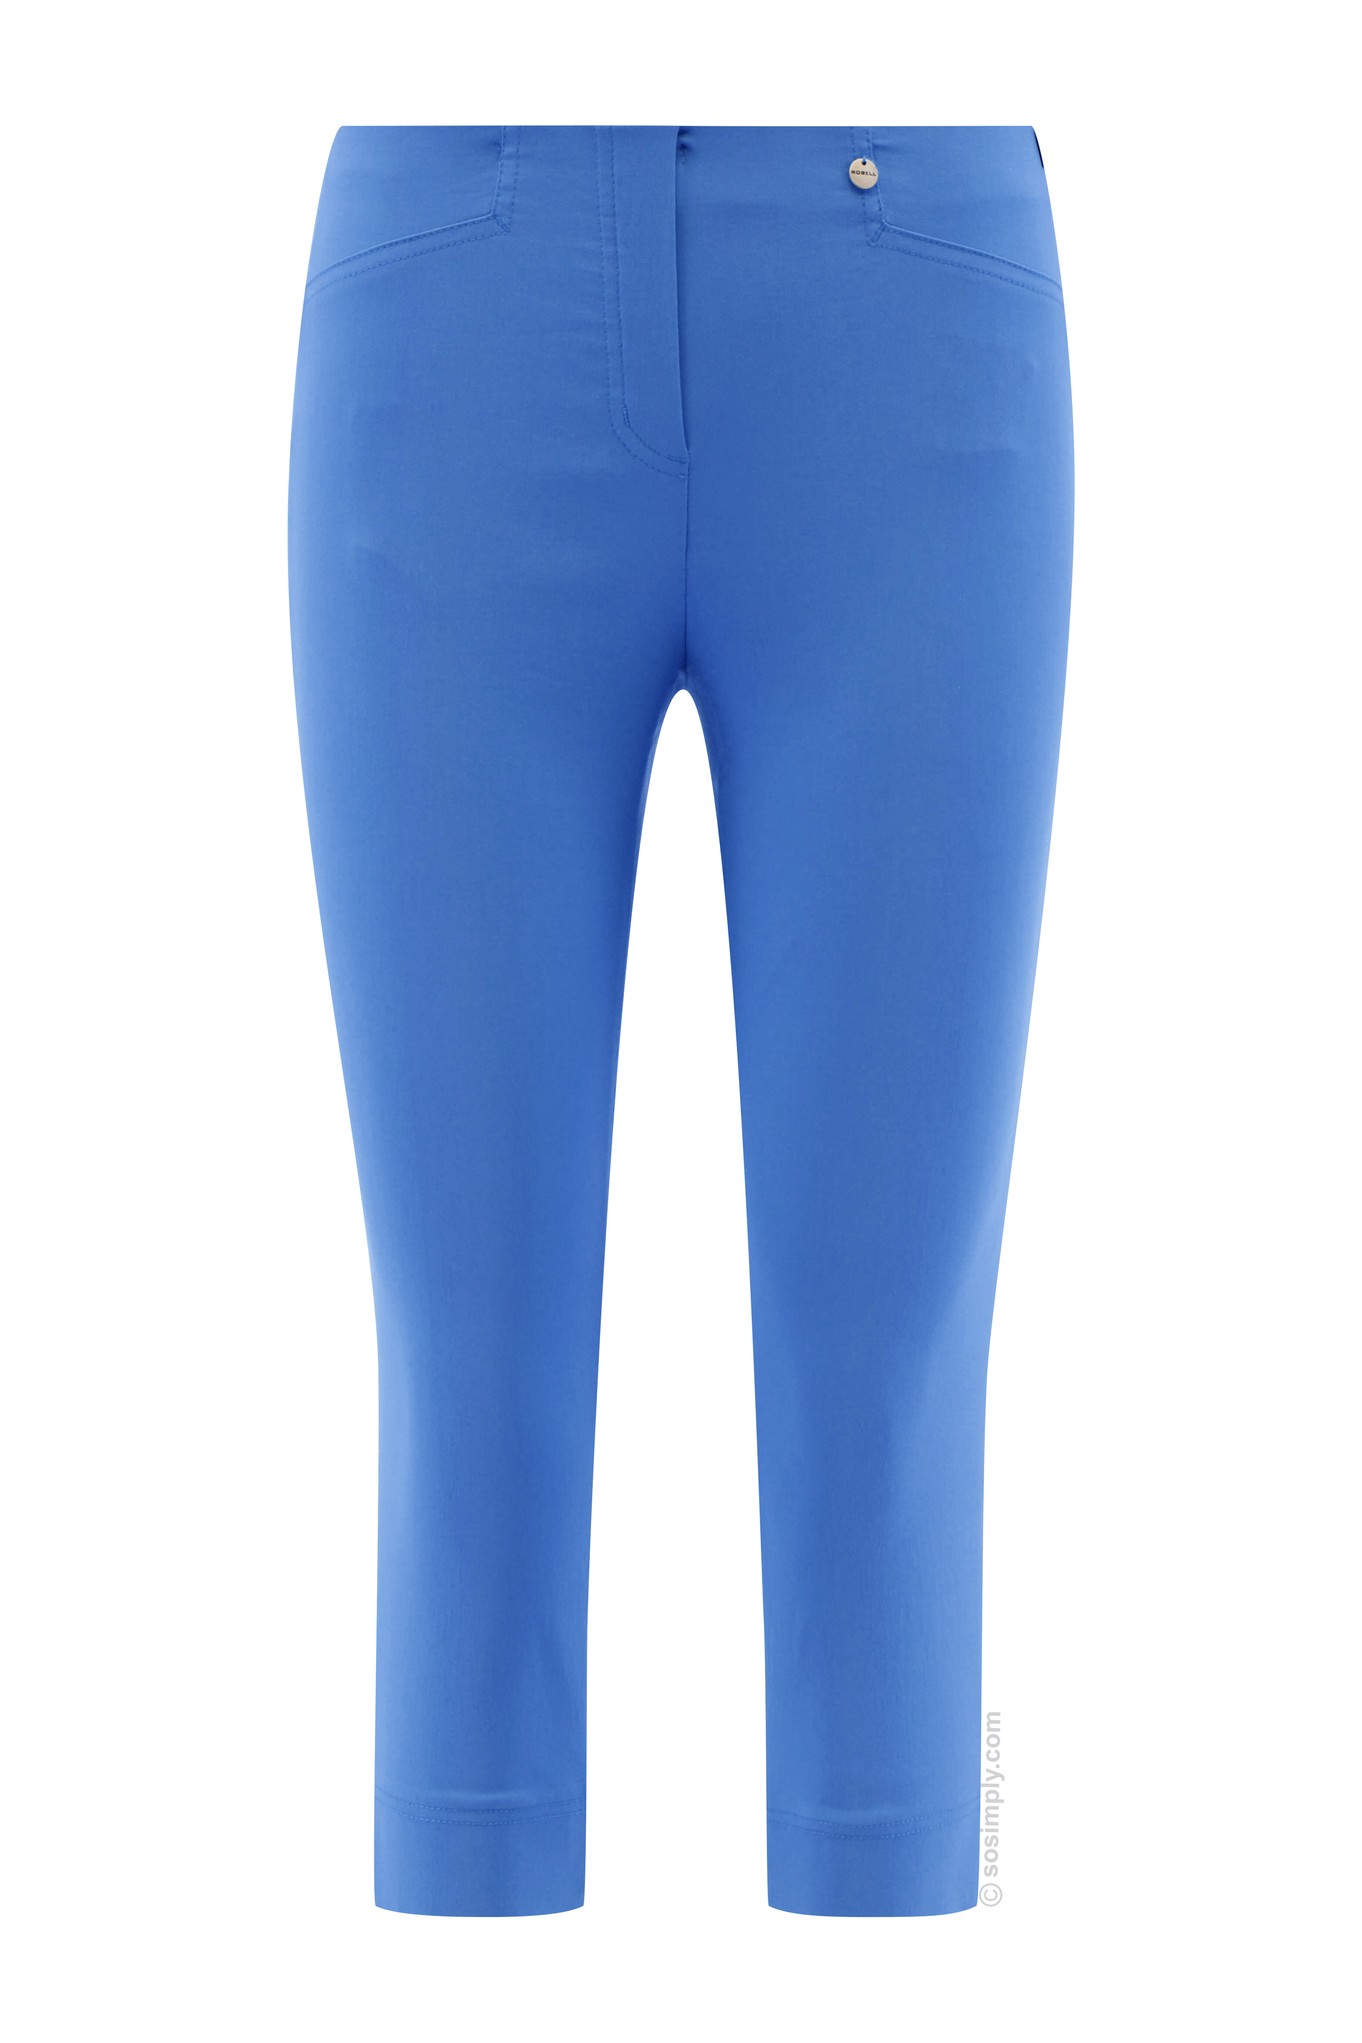 Robell Rose 07 Crop Trousers | So Simply